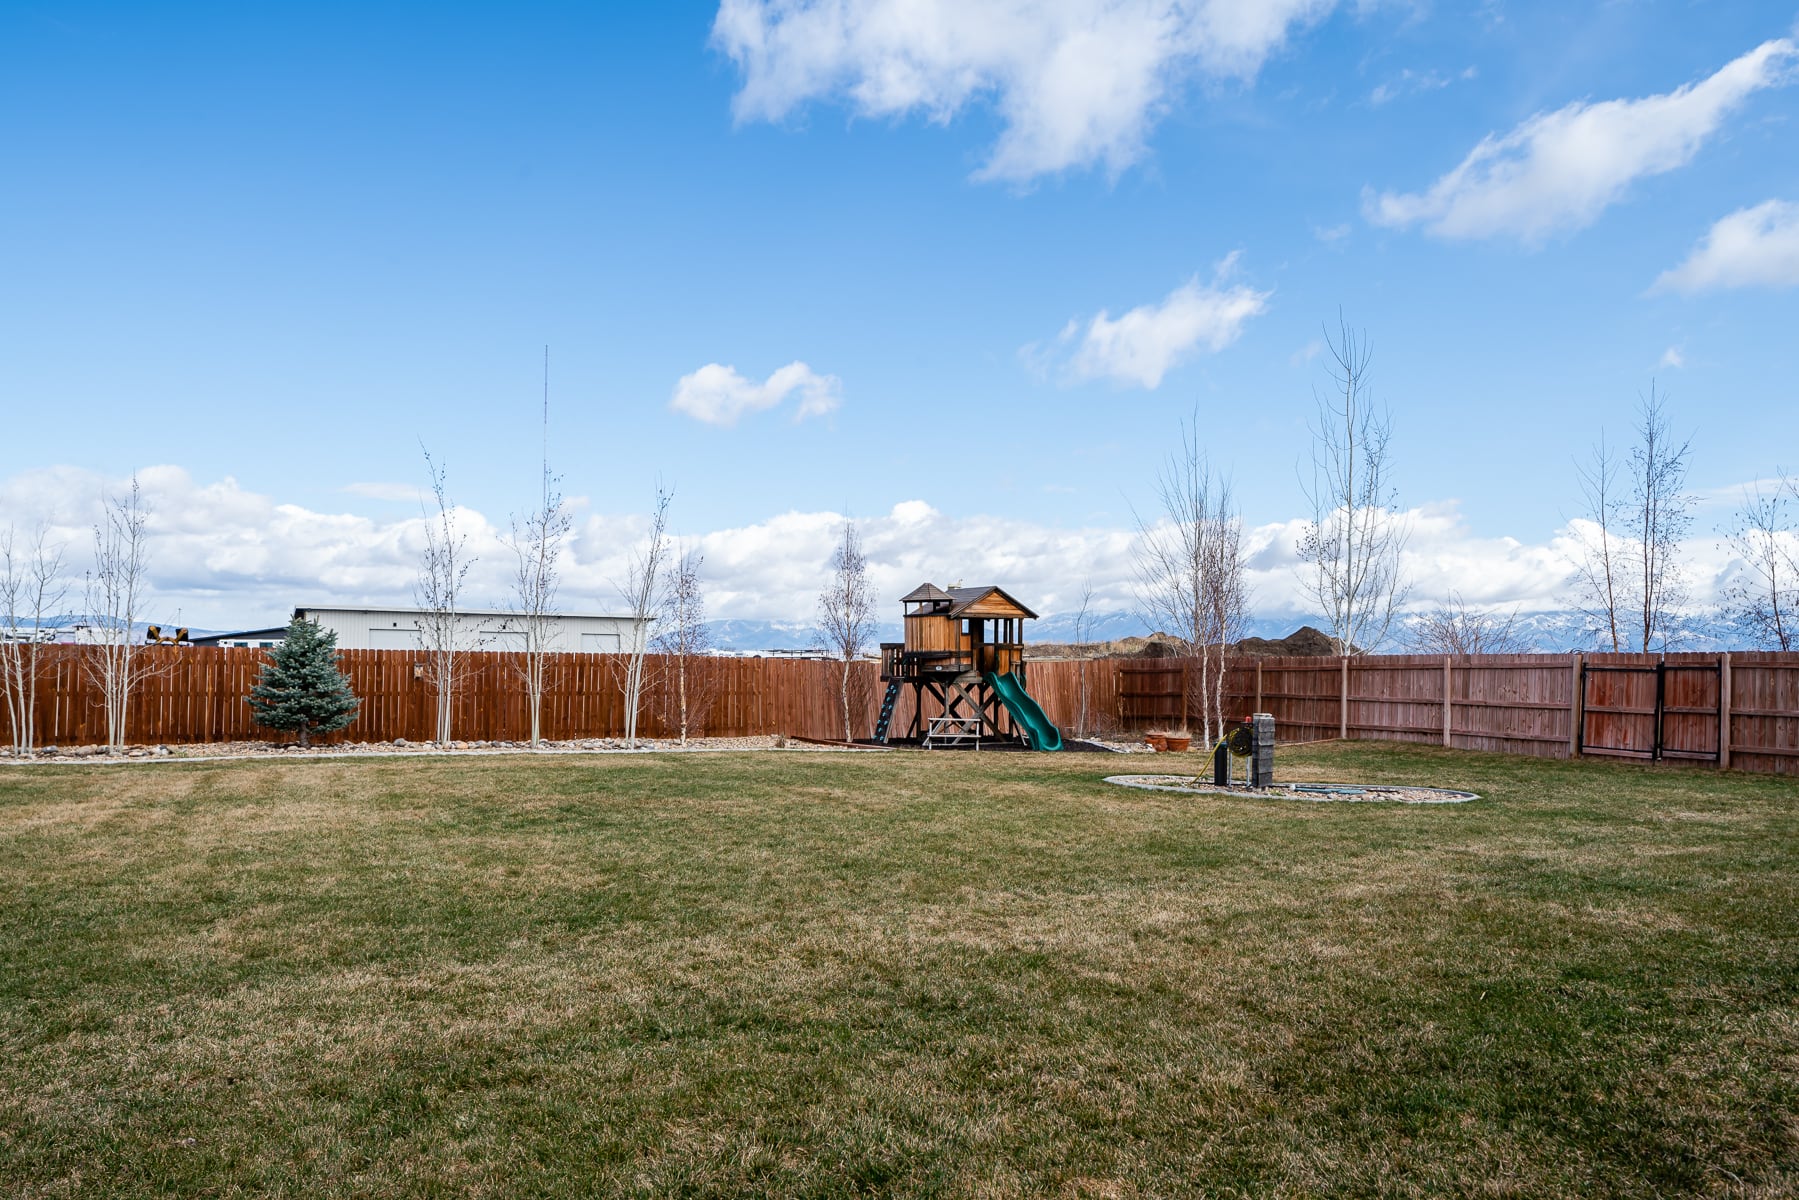 488 Countryside Lane backyard showing playset and landscaping with trees and water spigot